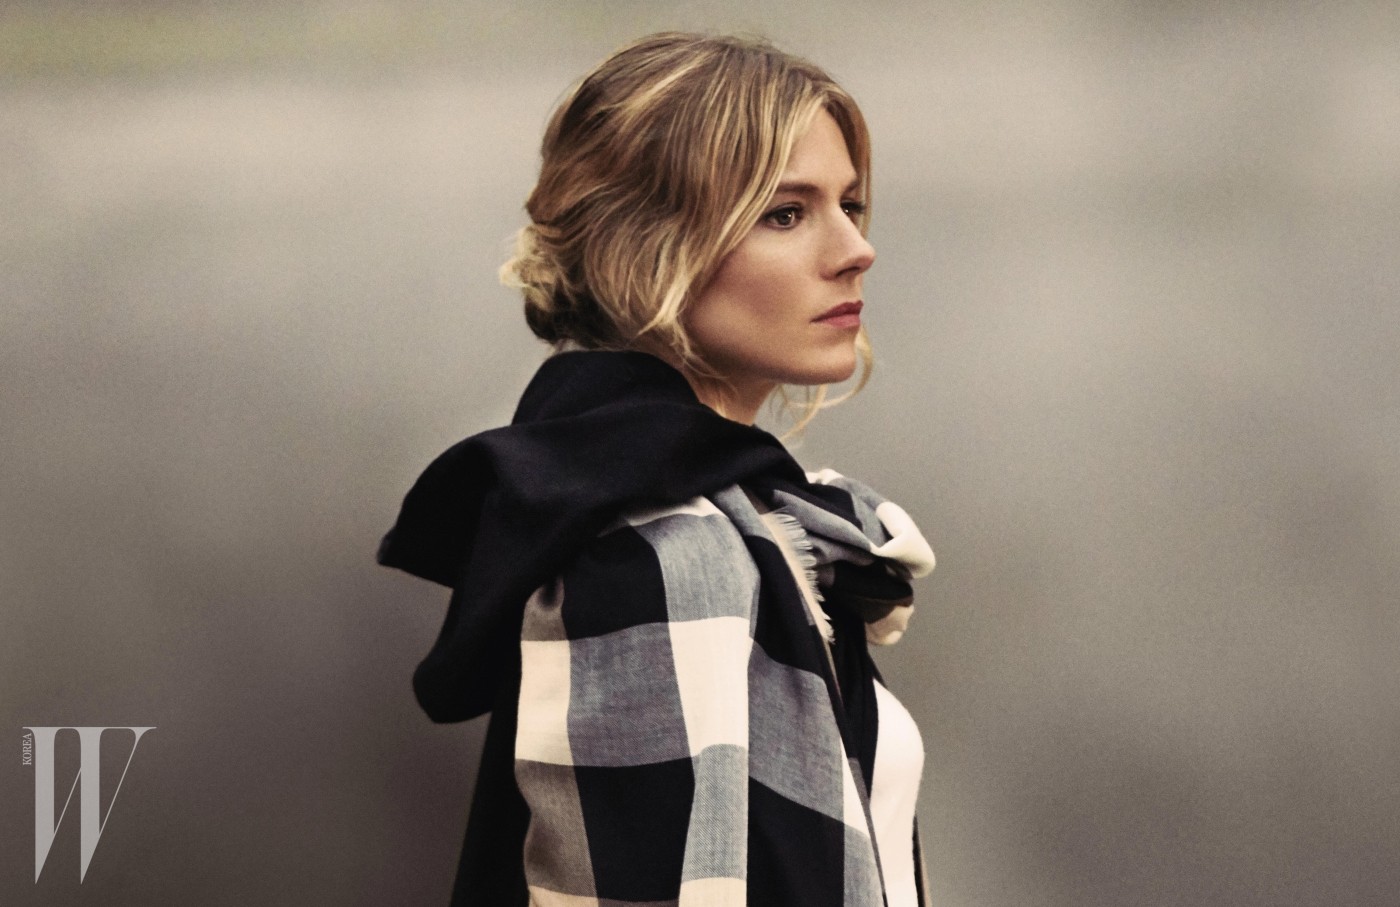 'The Tale of Thomas Burberry' Campaign - Sienna Miller (on embargo until 1 November 2016 8AM UK time)